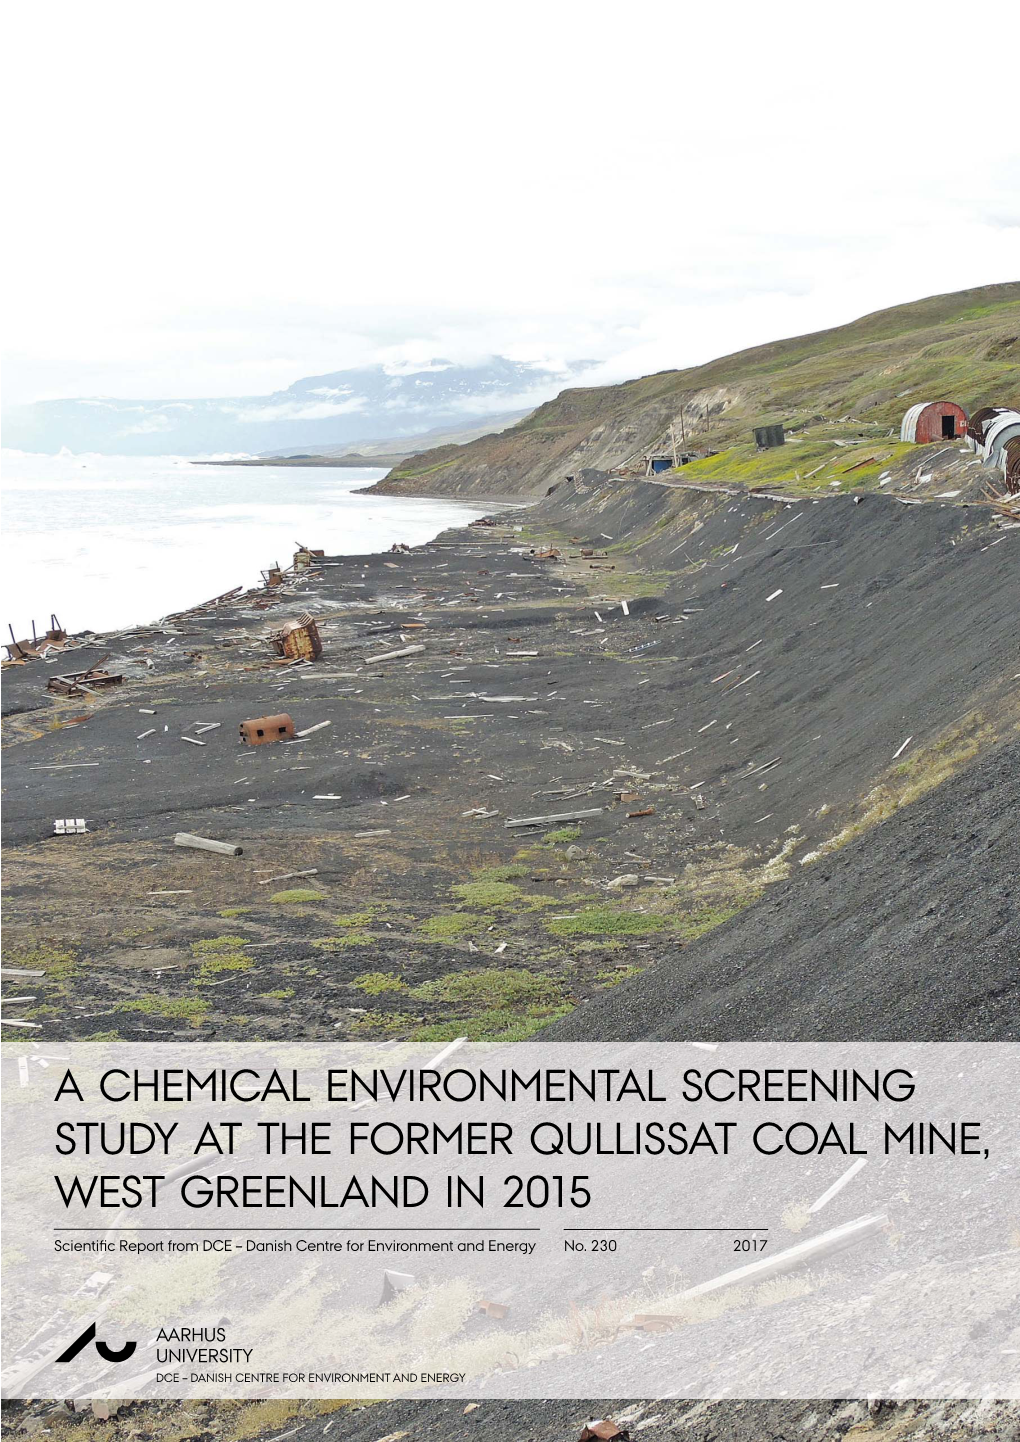 A Chemical Environmental Screening Study at the Former Qullissat Coal Mine, West Greenland in 2015